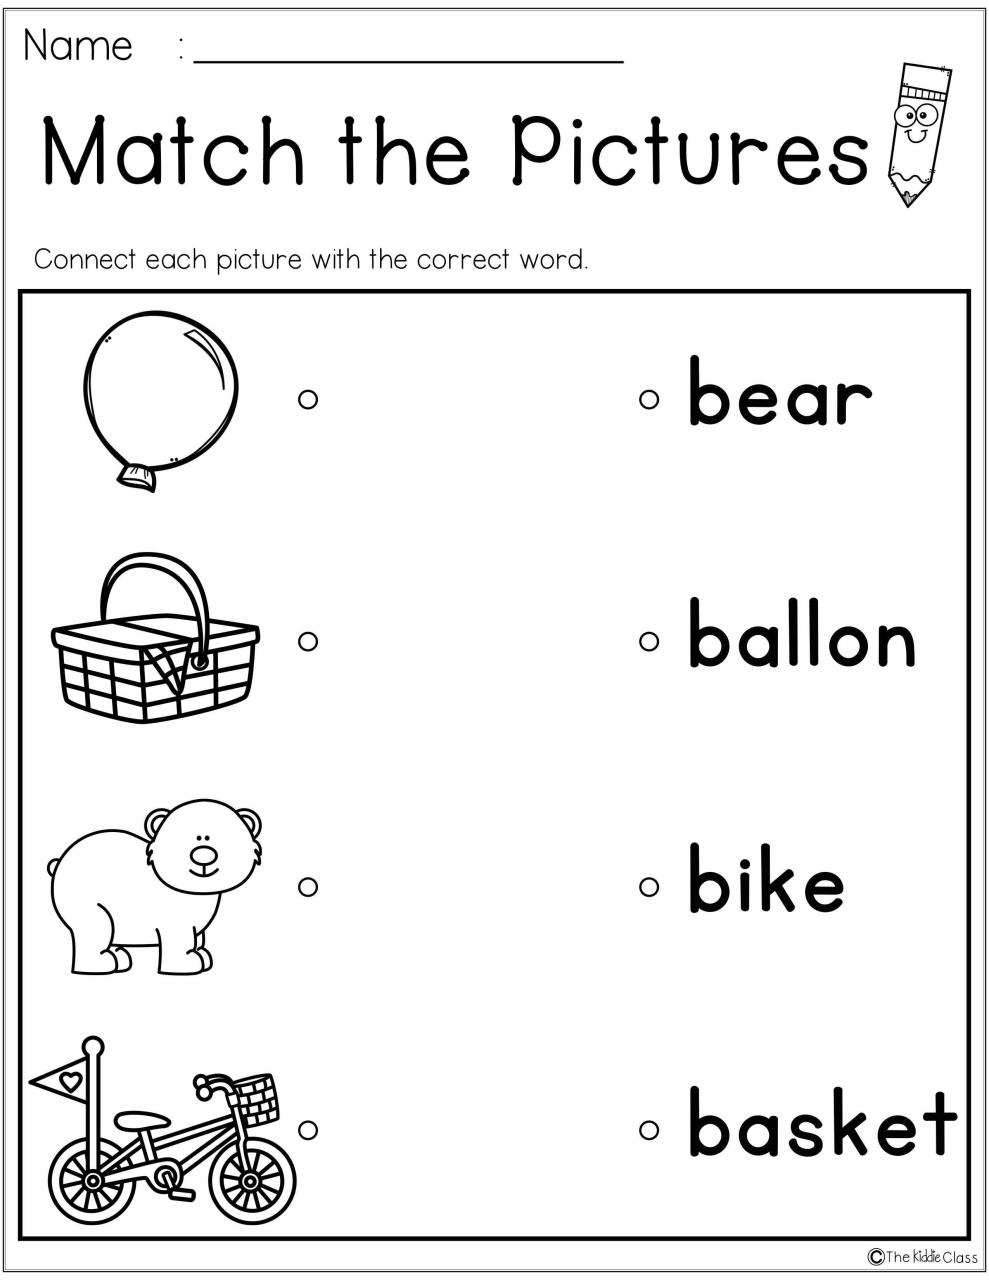 Free Printable Letter B Worksheets For Toddlers